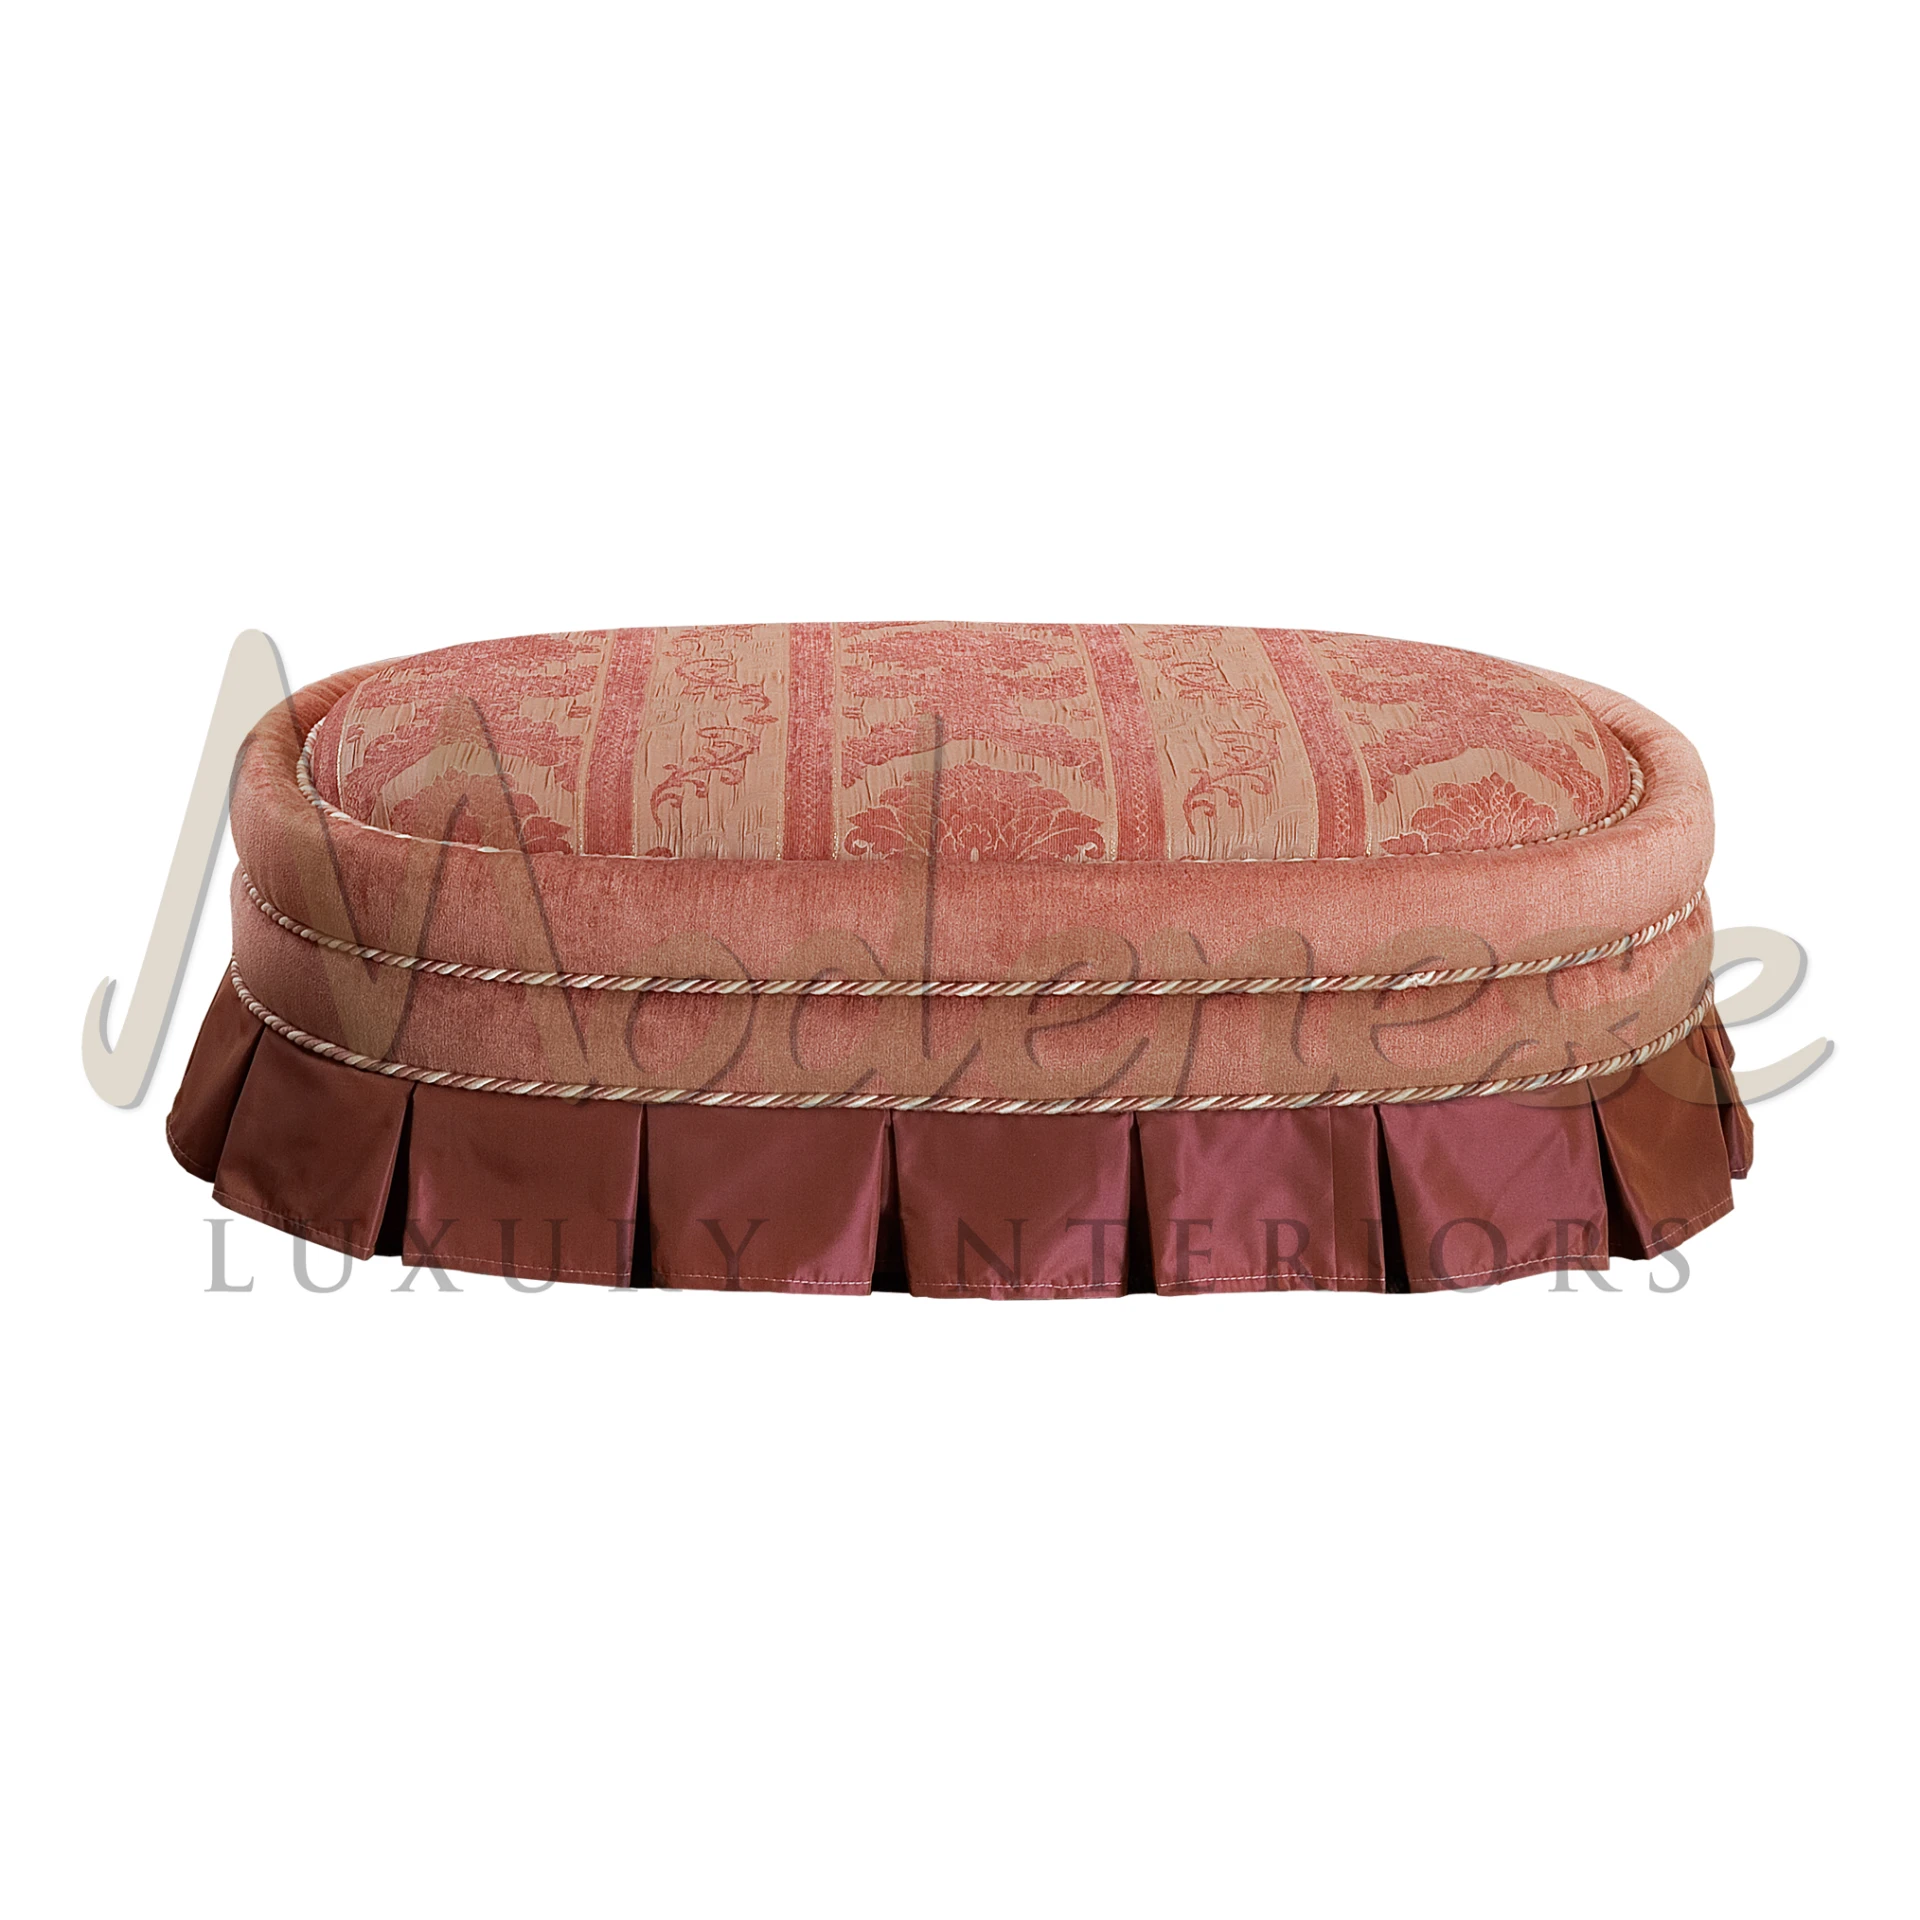 Experience Comfort: Oval Upholstered Pouffe for Your Home